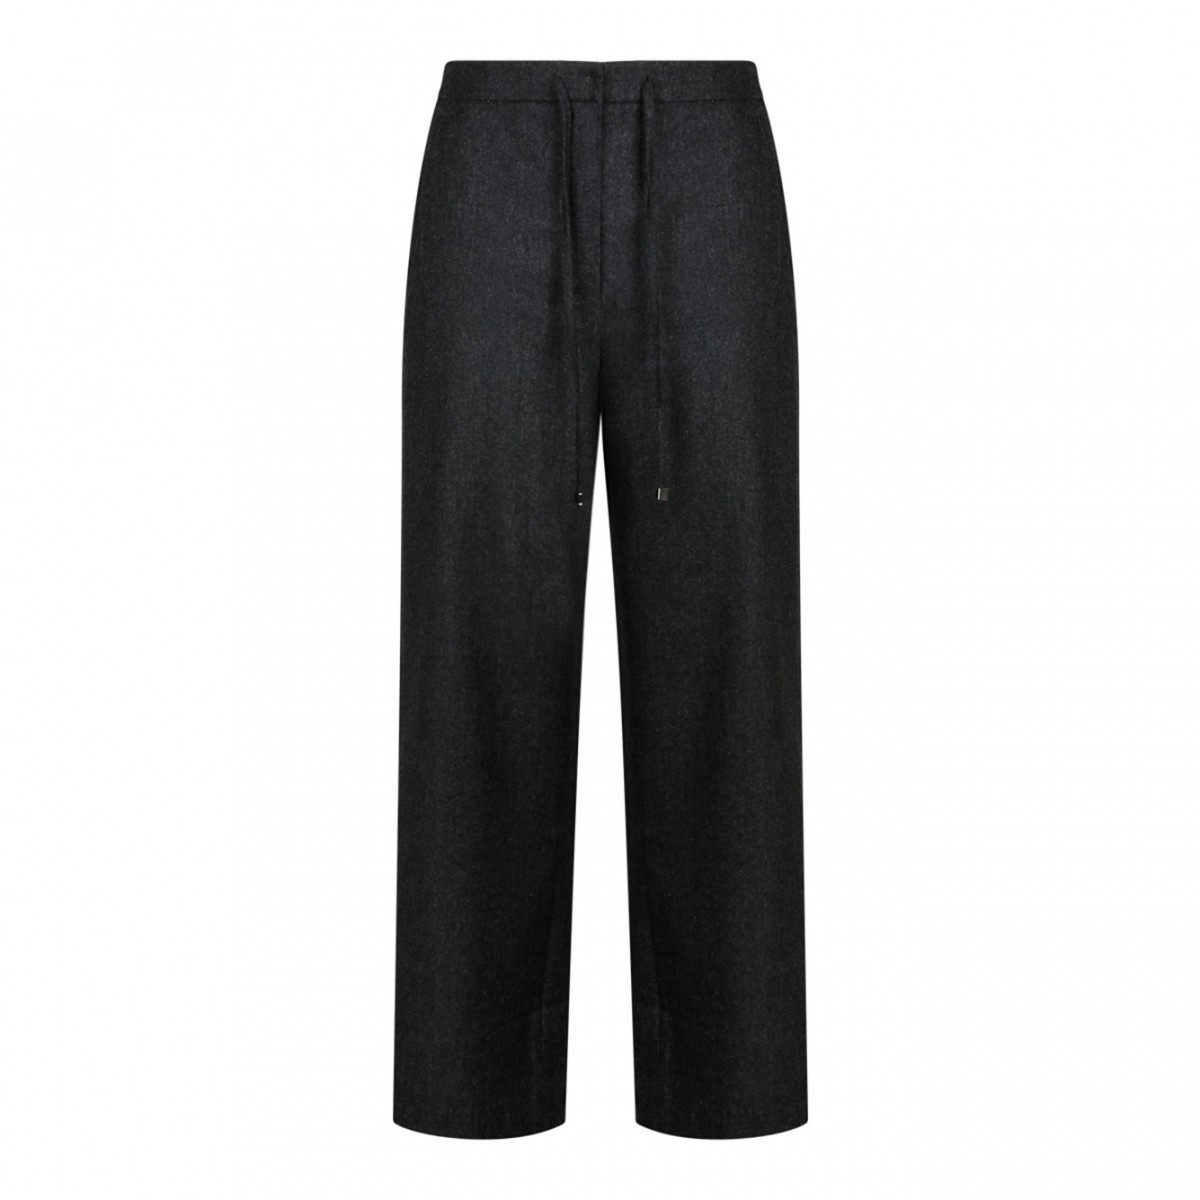 Anthracite Flannel Joggings Trousers